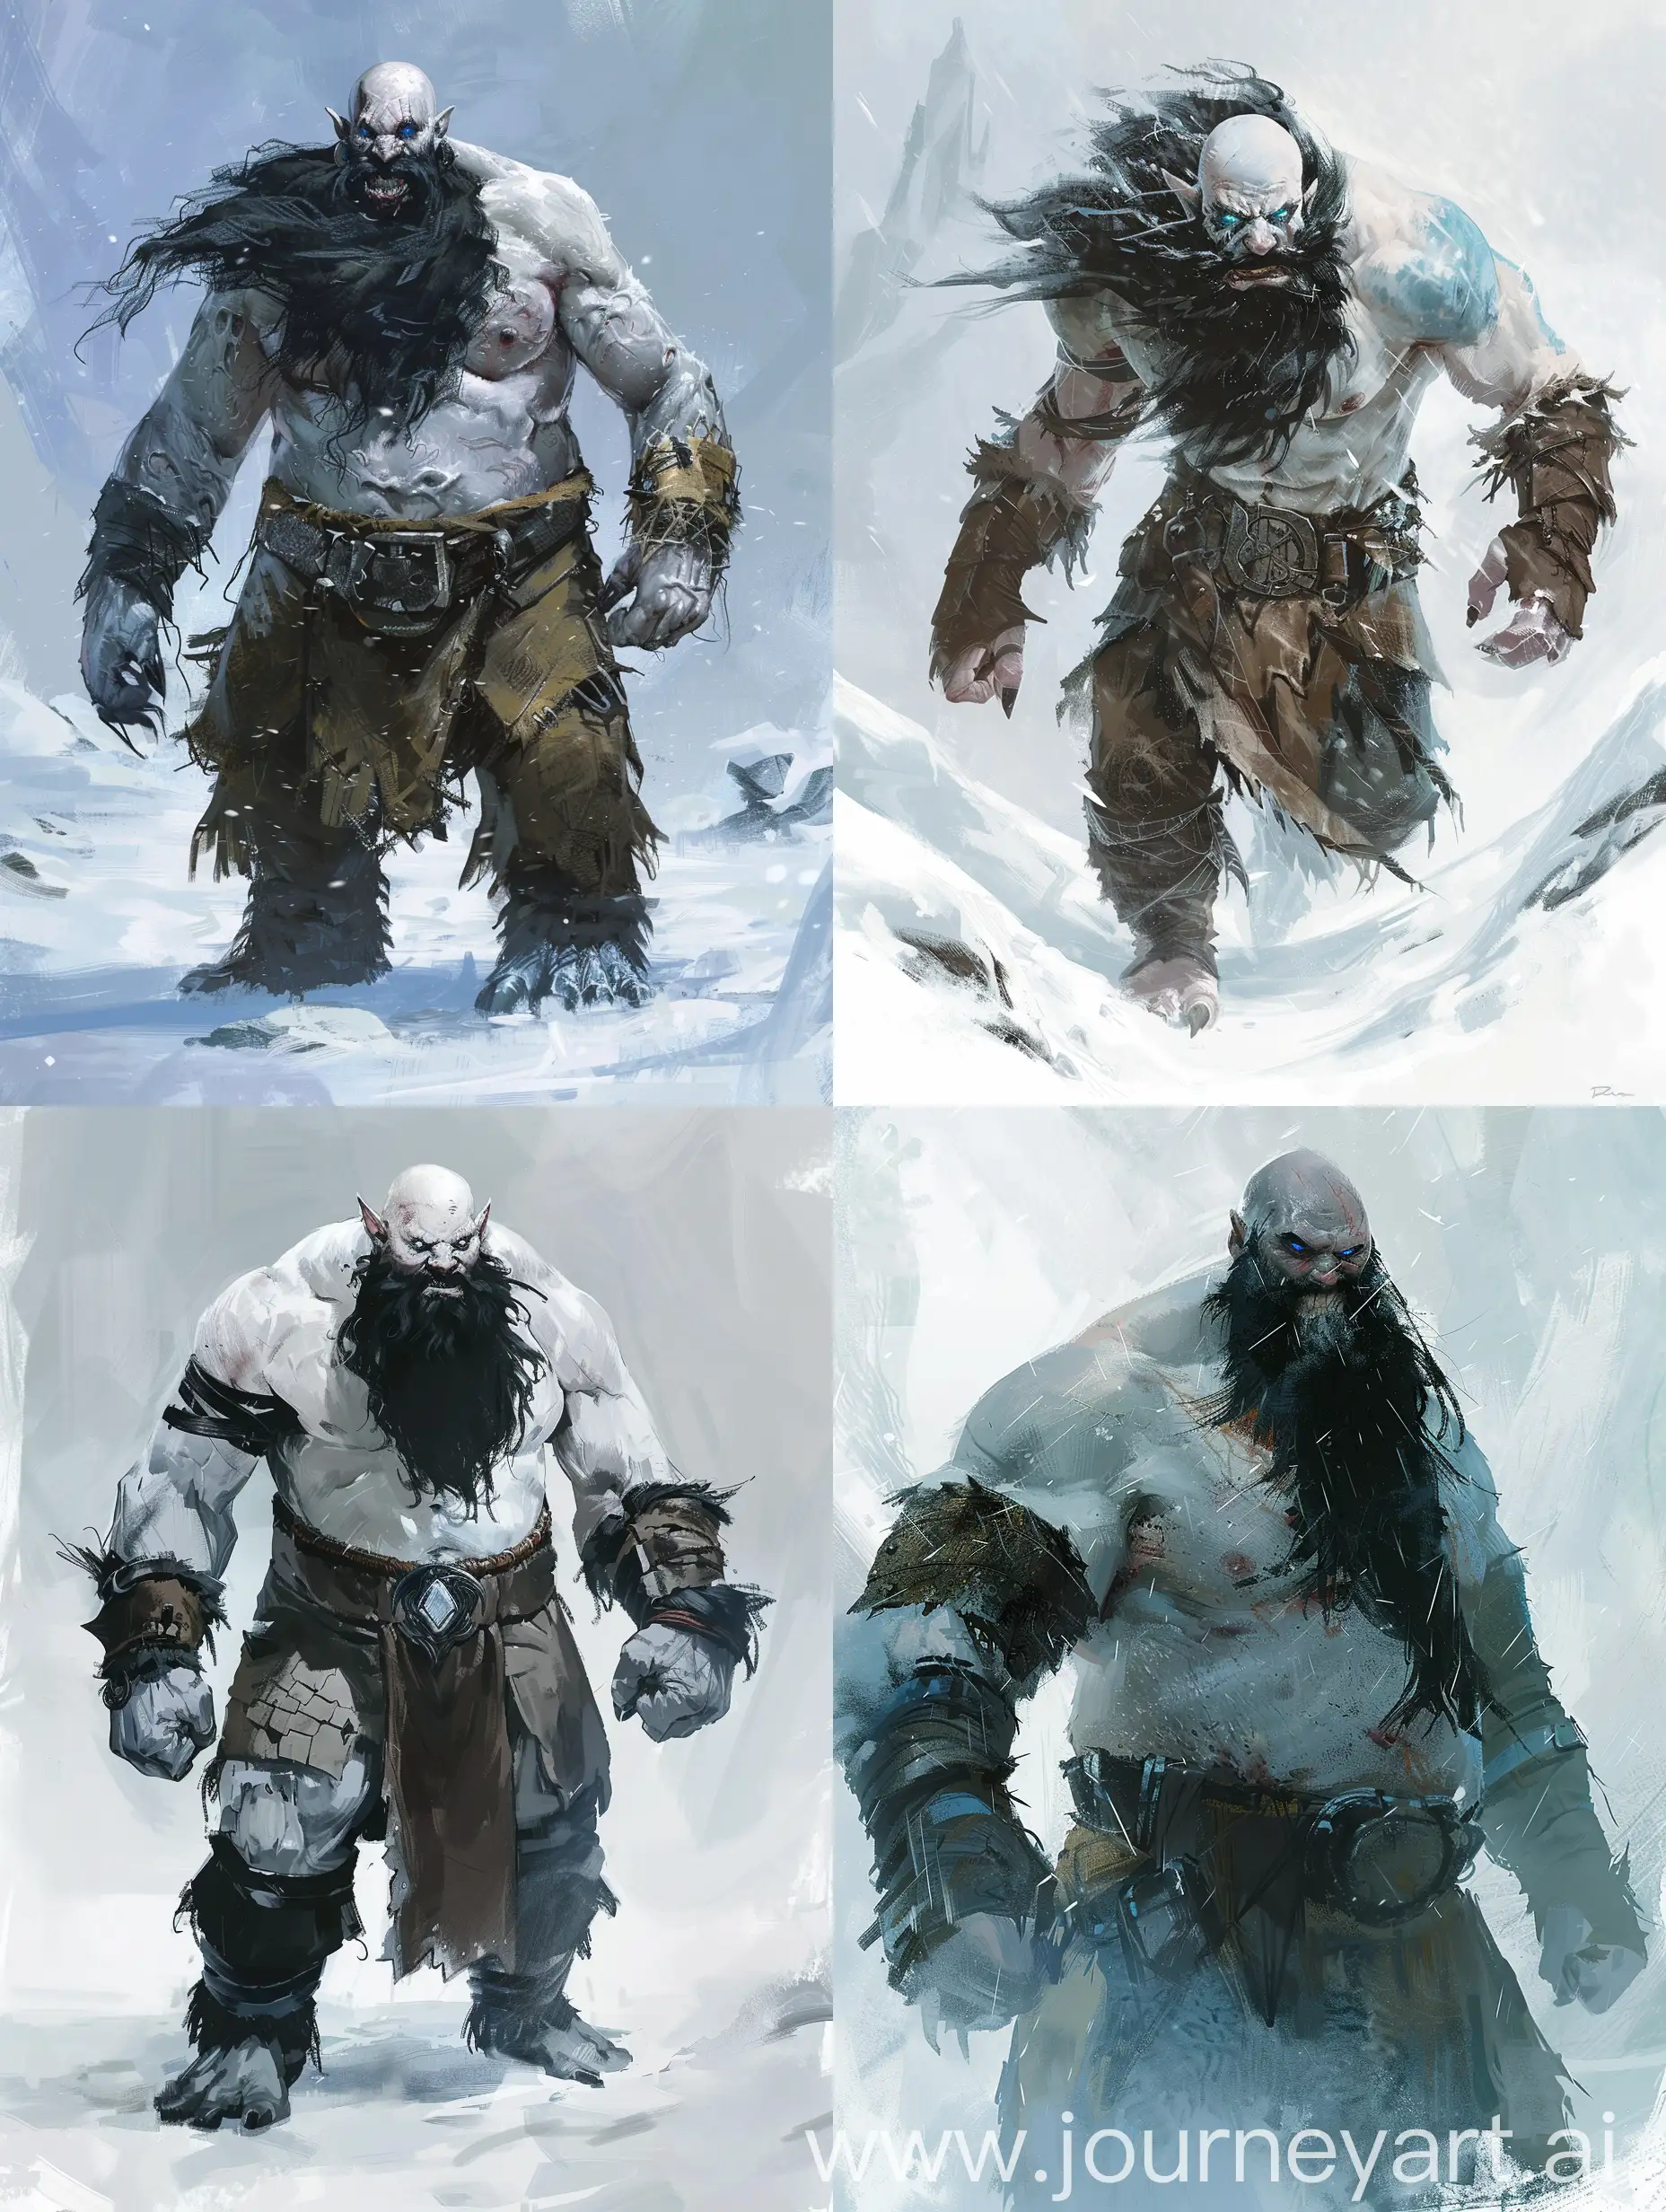 a D&D Concept art, of a uncharacteristically Overtly Friendly  goliath, around 7.5 feet tall and 325lbs, welcomingly and charmingly through his black wind blown beard as if happy to see an old friend. Bald head and pale skin nearing the color of snow. He has Icy Blue eyes that are